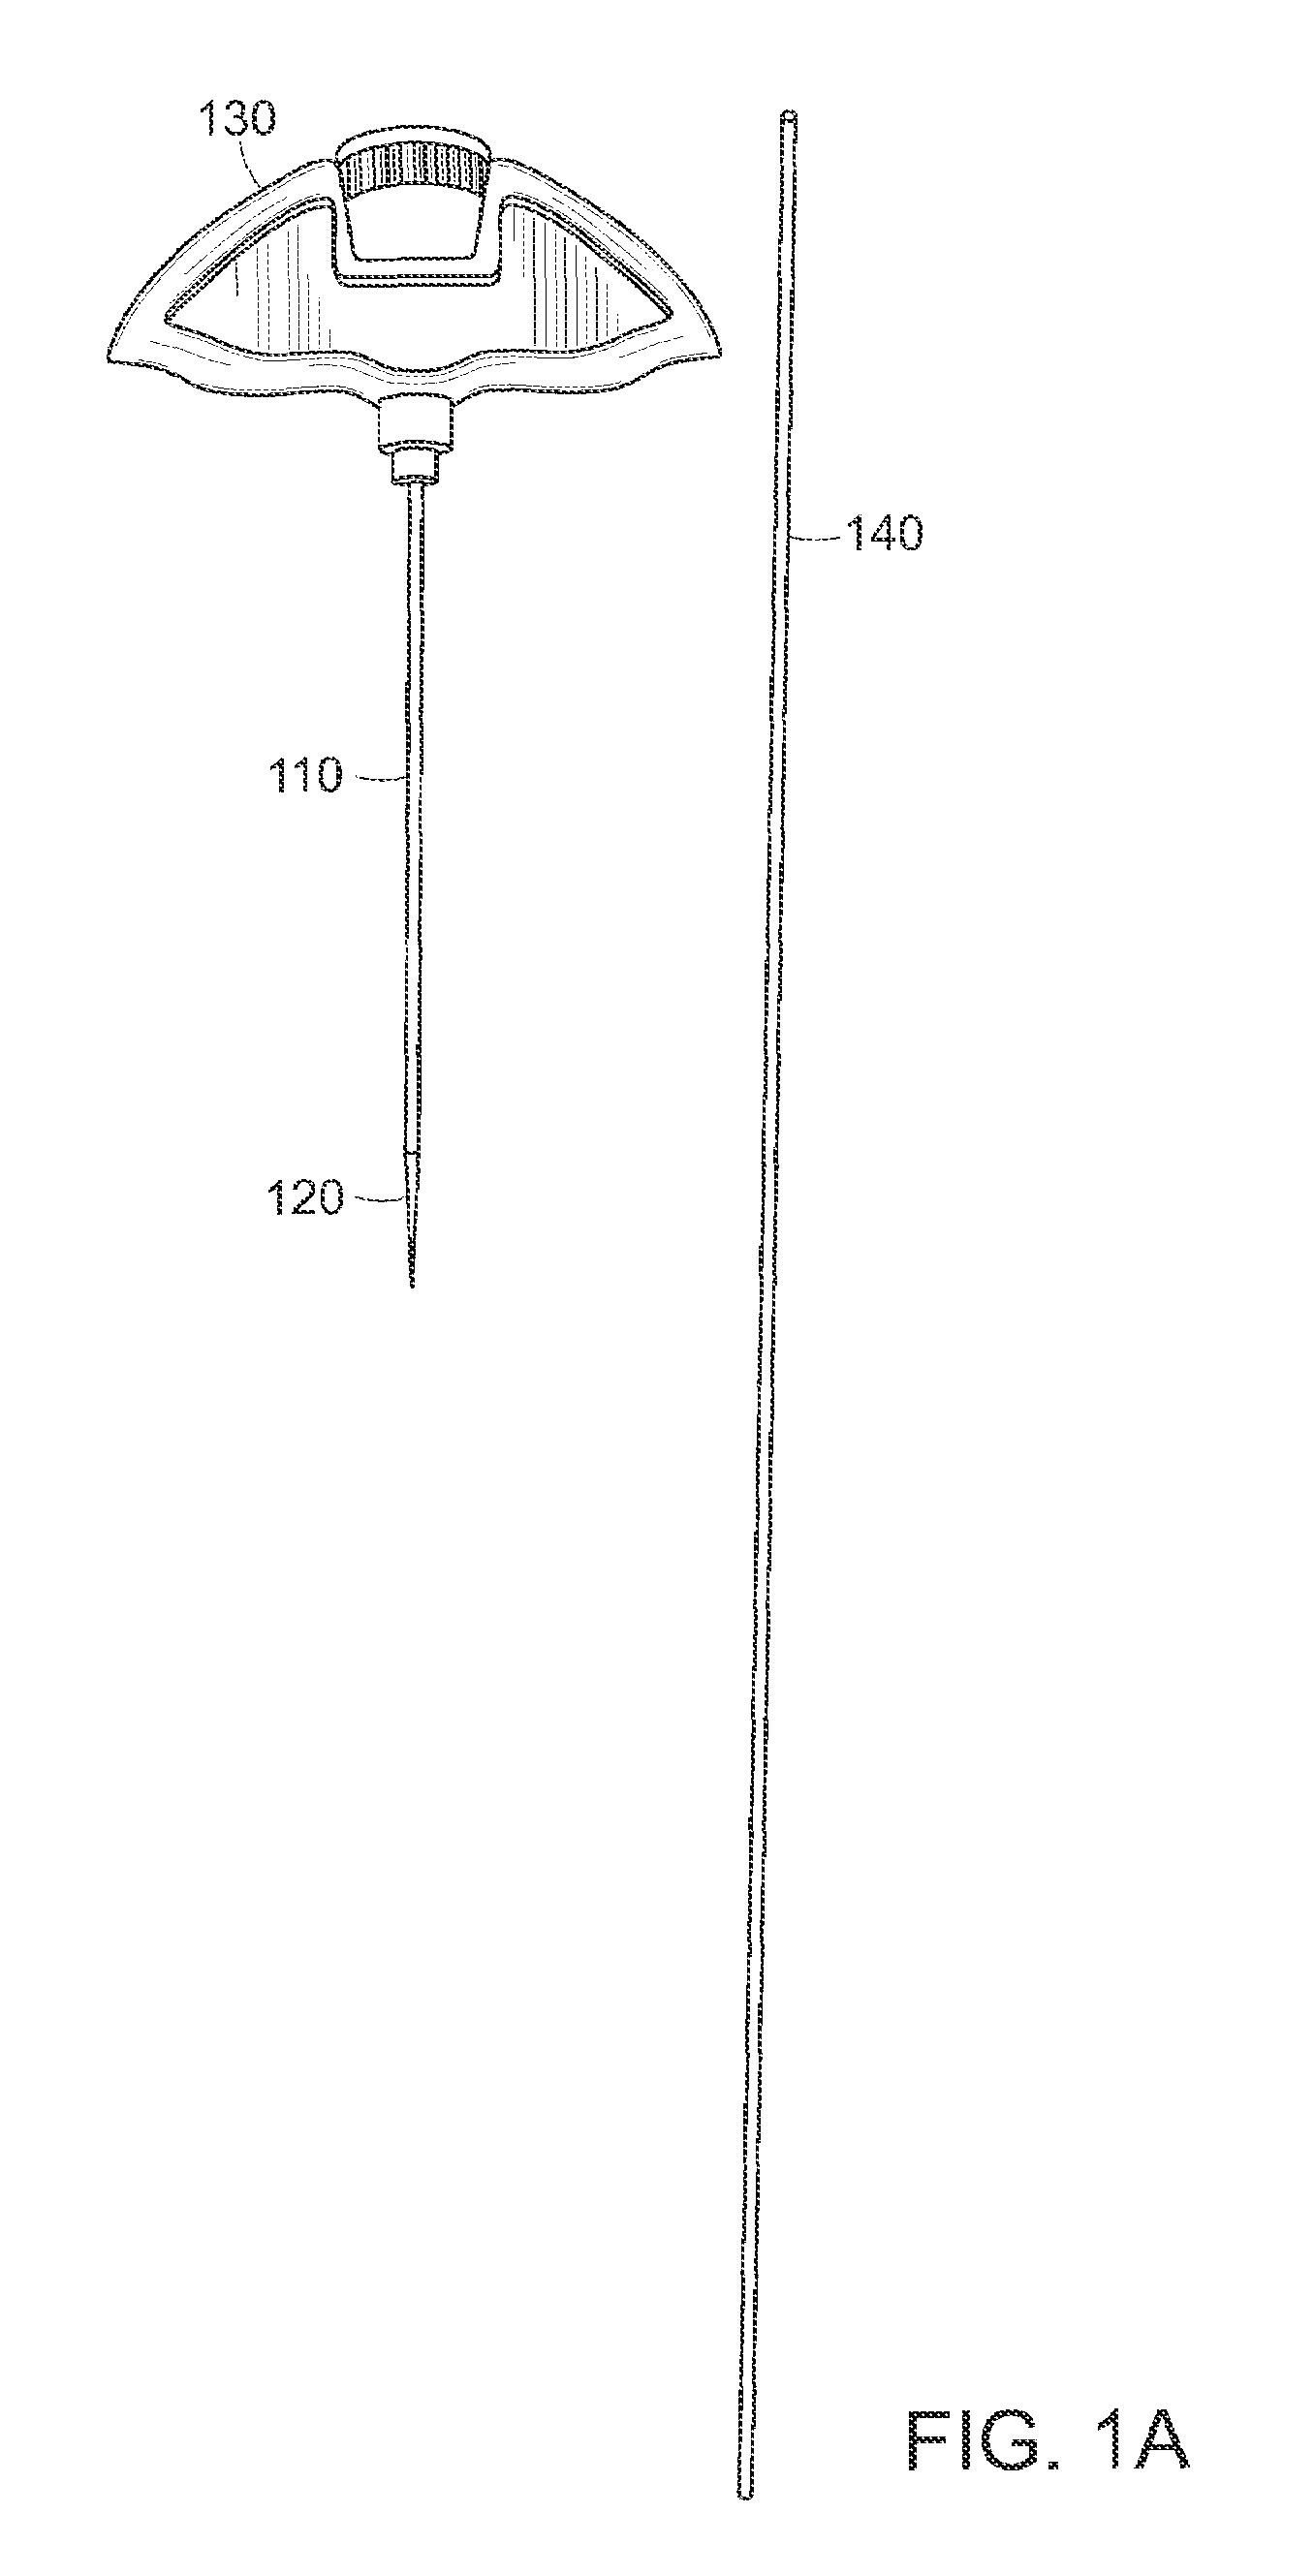 Devices and methods for fracture reduction